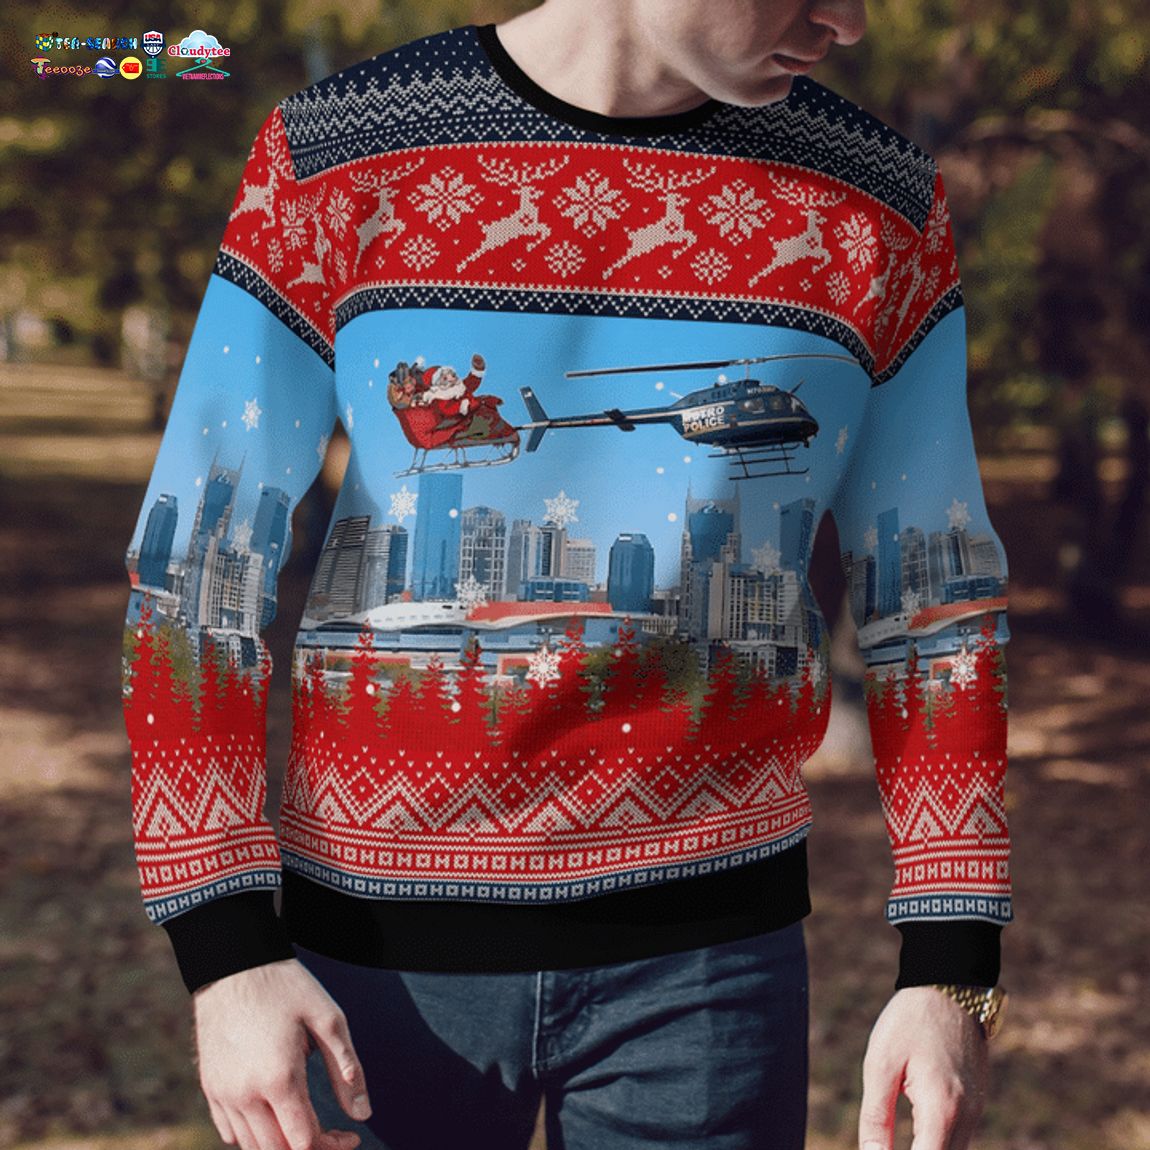 Tennessee Metropolitan Nashville Police Department OH-58 Kiowa Helicopter With Santa 3D Christmas Sweater